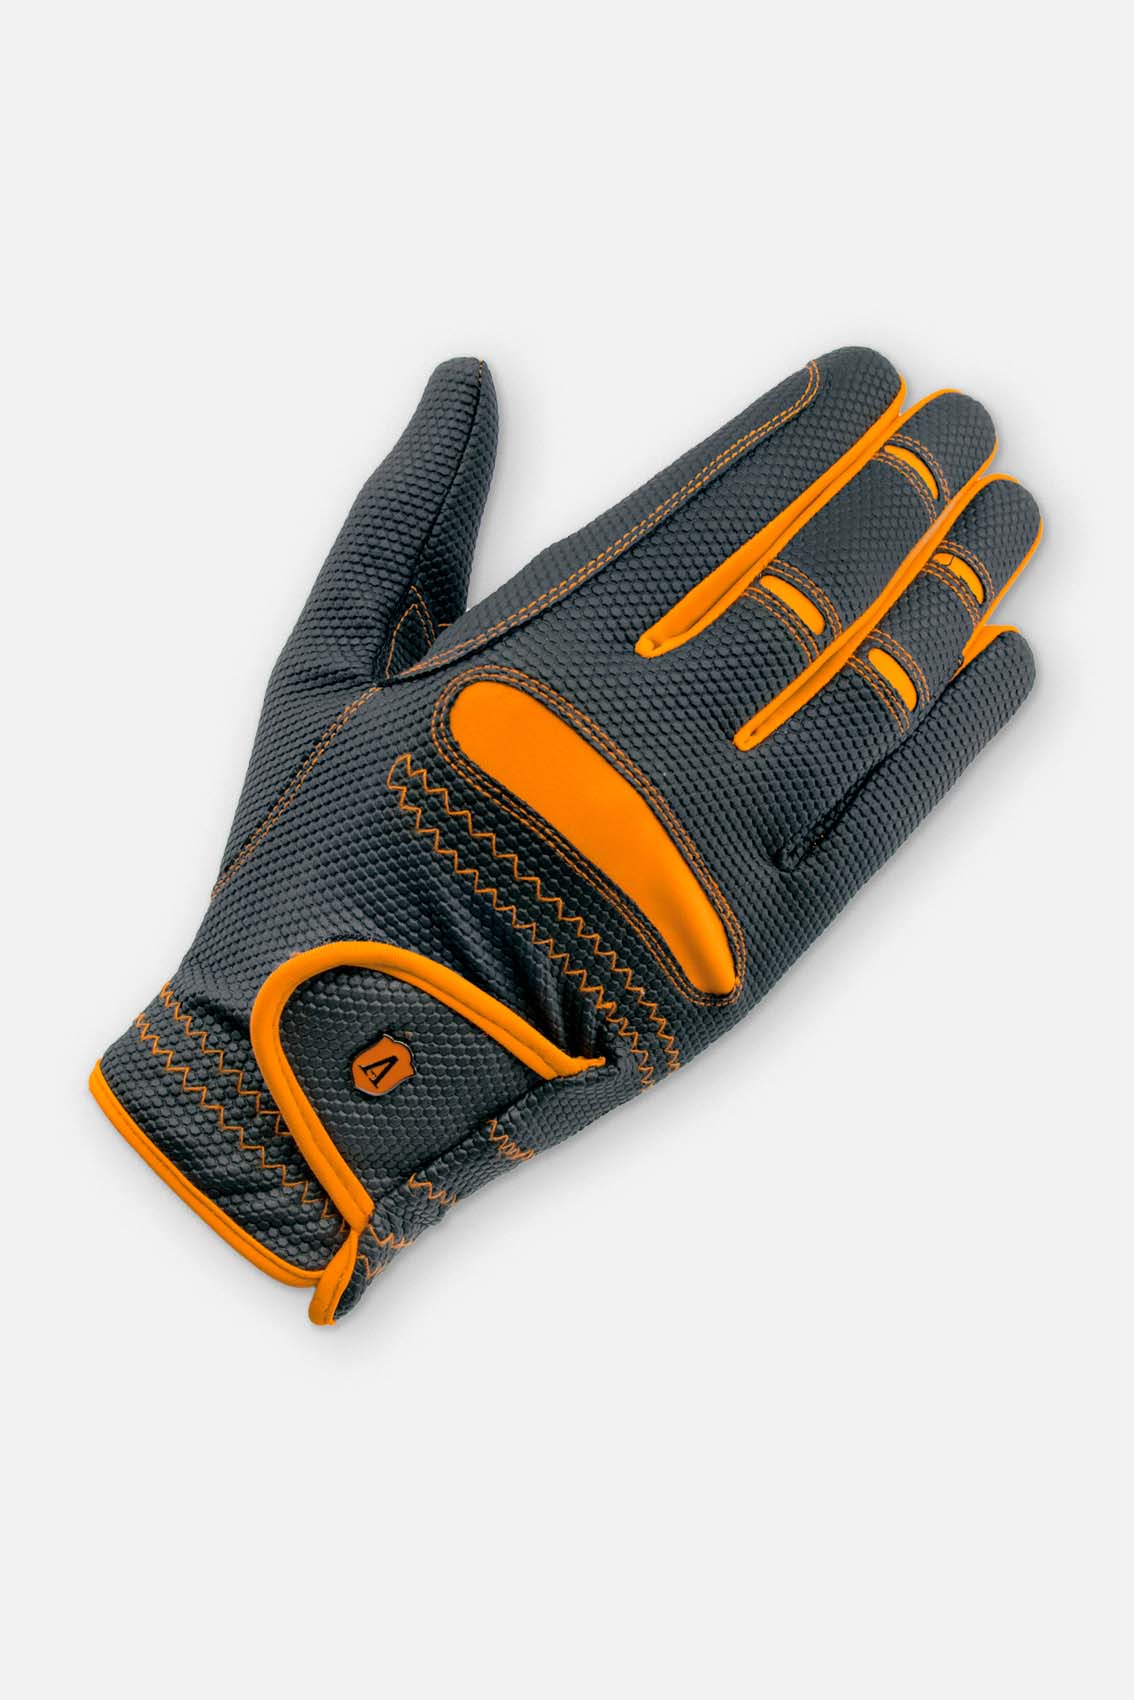 Women's riding gloves made of PU-leather with comfort stretch